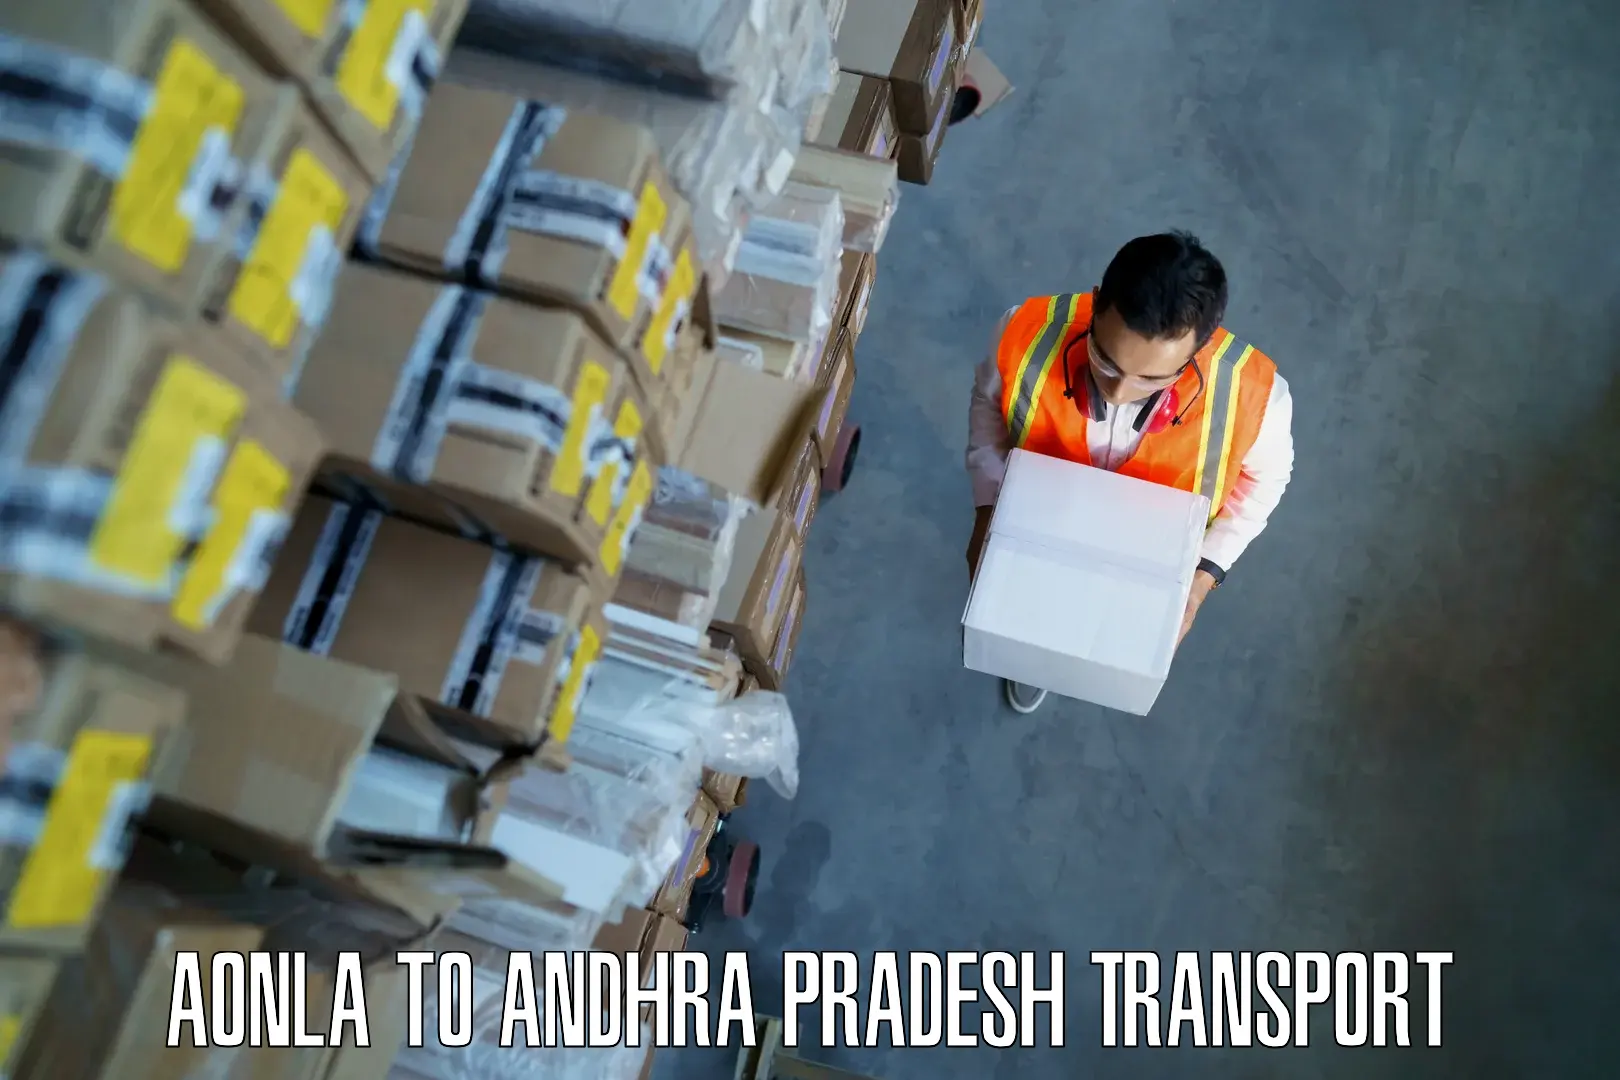 Parcel transport services in Aonla to Gooty